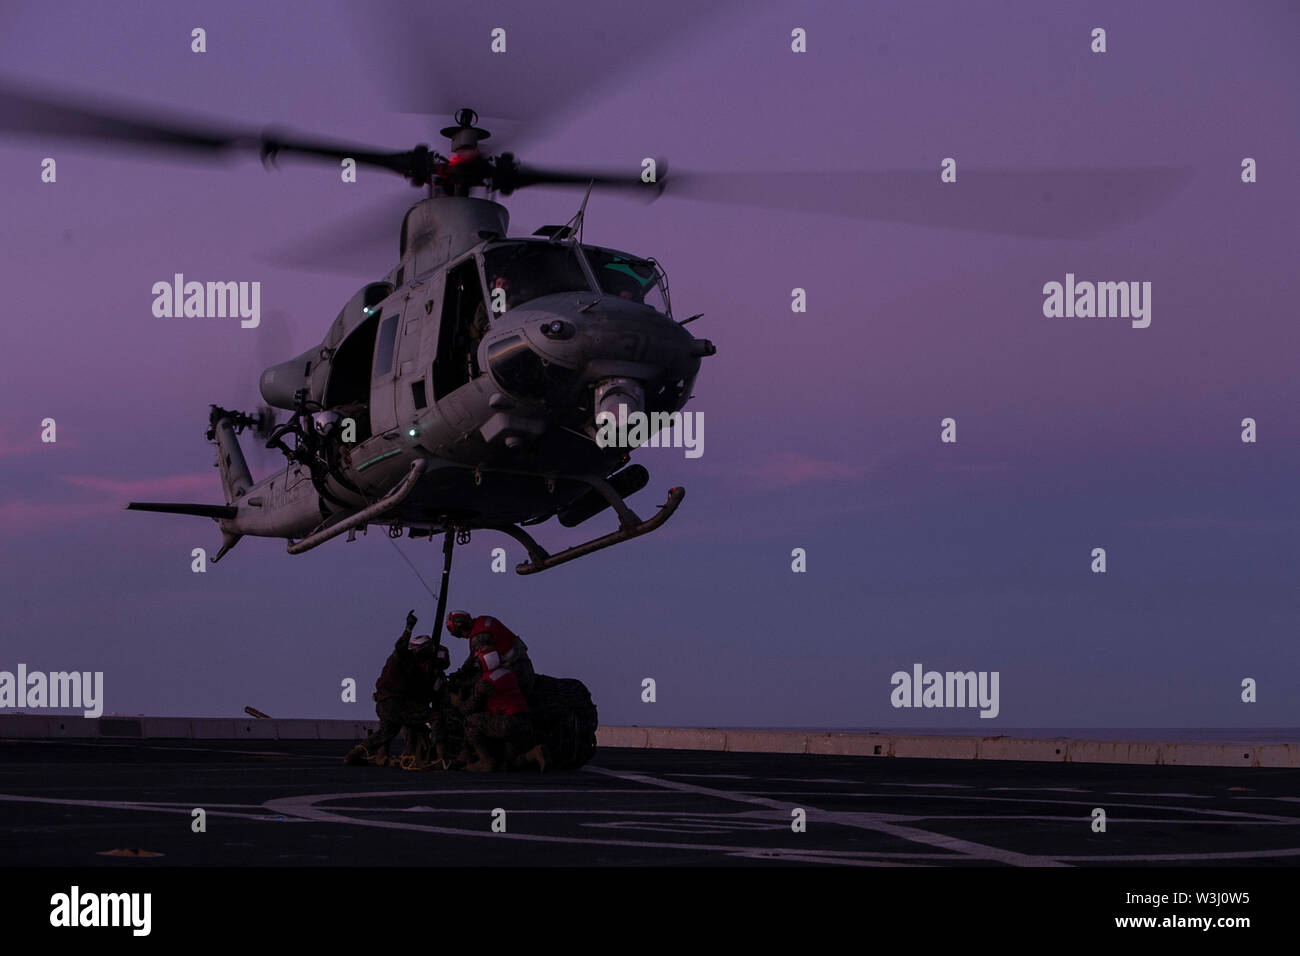 Marines with the 31st Marine Expeditionary Unit attach cargo to a UH-1Y Huey helicopter with Marine Medium Tiltrotor Squadron 265 during a landing support exercise aboard the amphibious transport dock USS Green Bay (LPD 20), underway in the Coral Sea, July 12, 2019. Green Bay, part of the Wasp Amphibious Ready Group, with embarked 31st MEU, is currently participating in Talisman Sabre 2019 off the coast of Northern Australia.  A bilateral, biennial event, Talisman Sabre is designed to improve U.S. and Australian combat training, readiness and interoperability through realistic, relevant traini Stock Photo